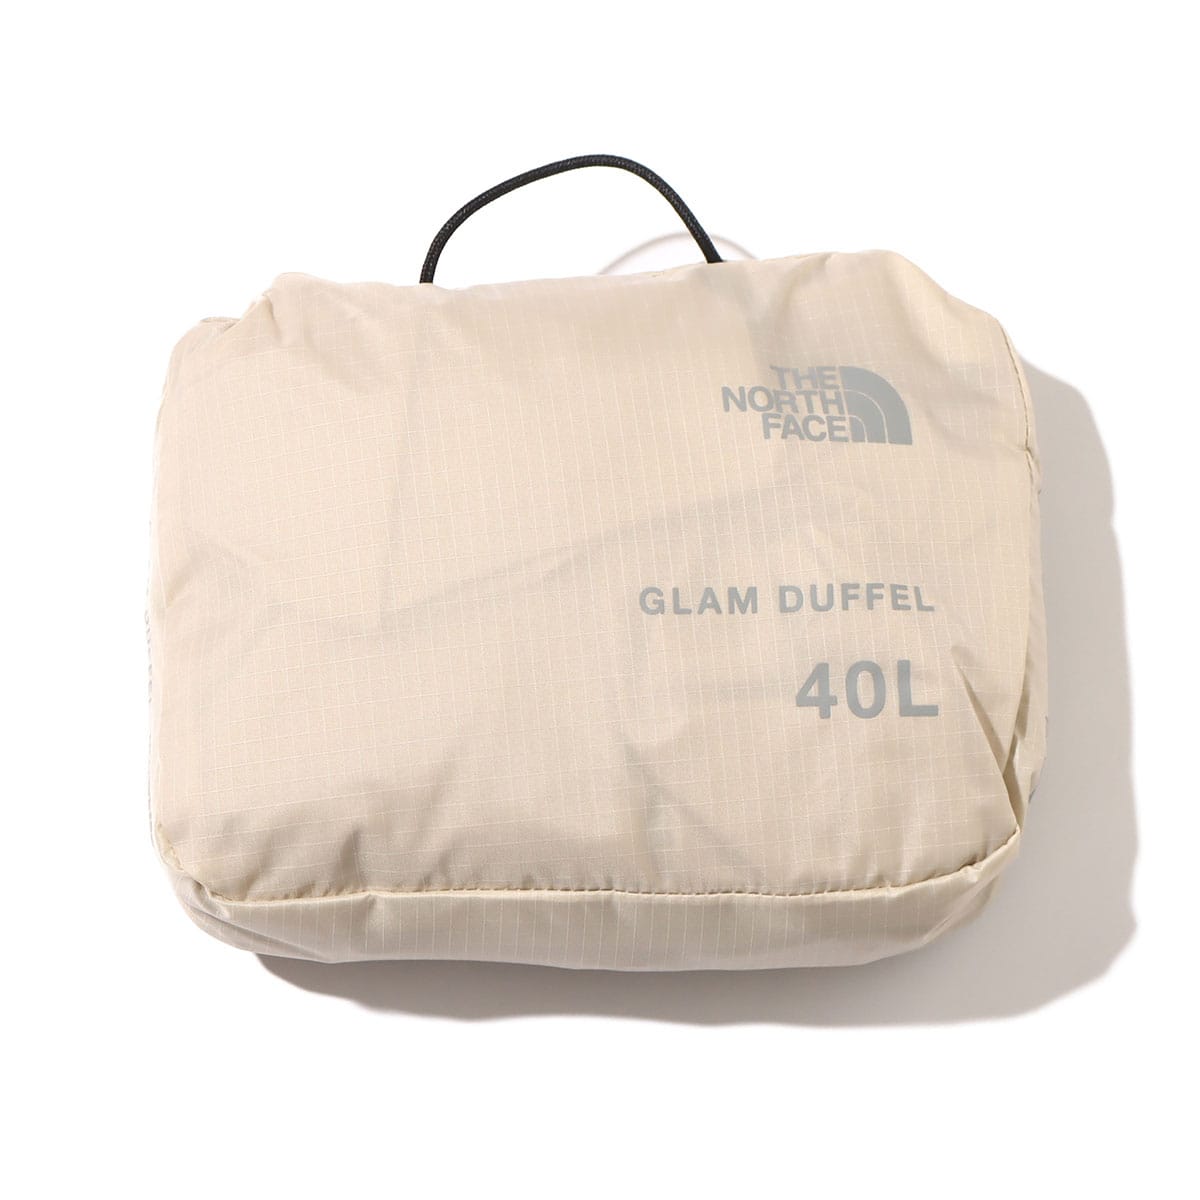 THE NORTH FACE Glam Duffel NM82341